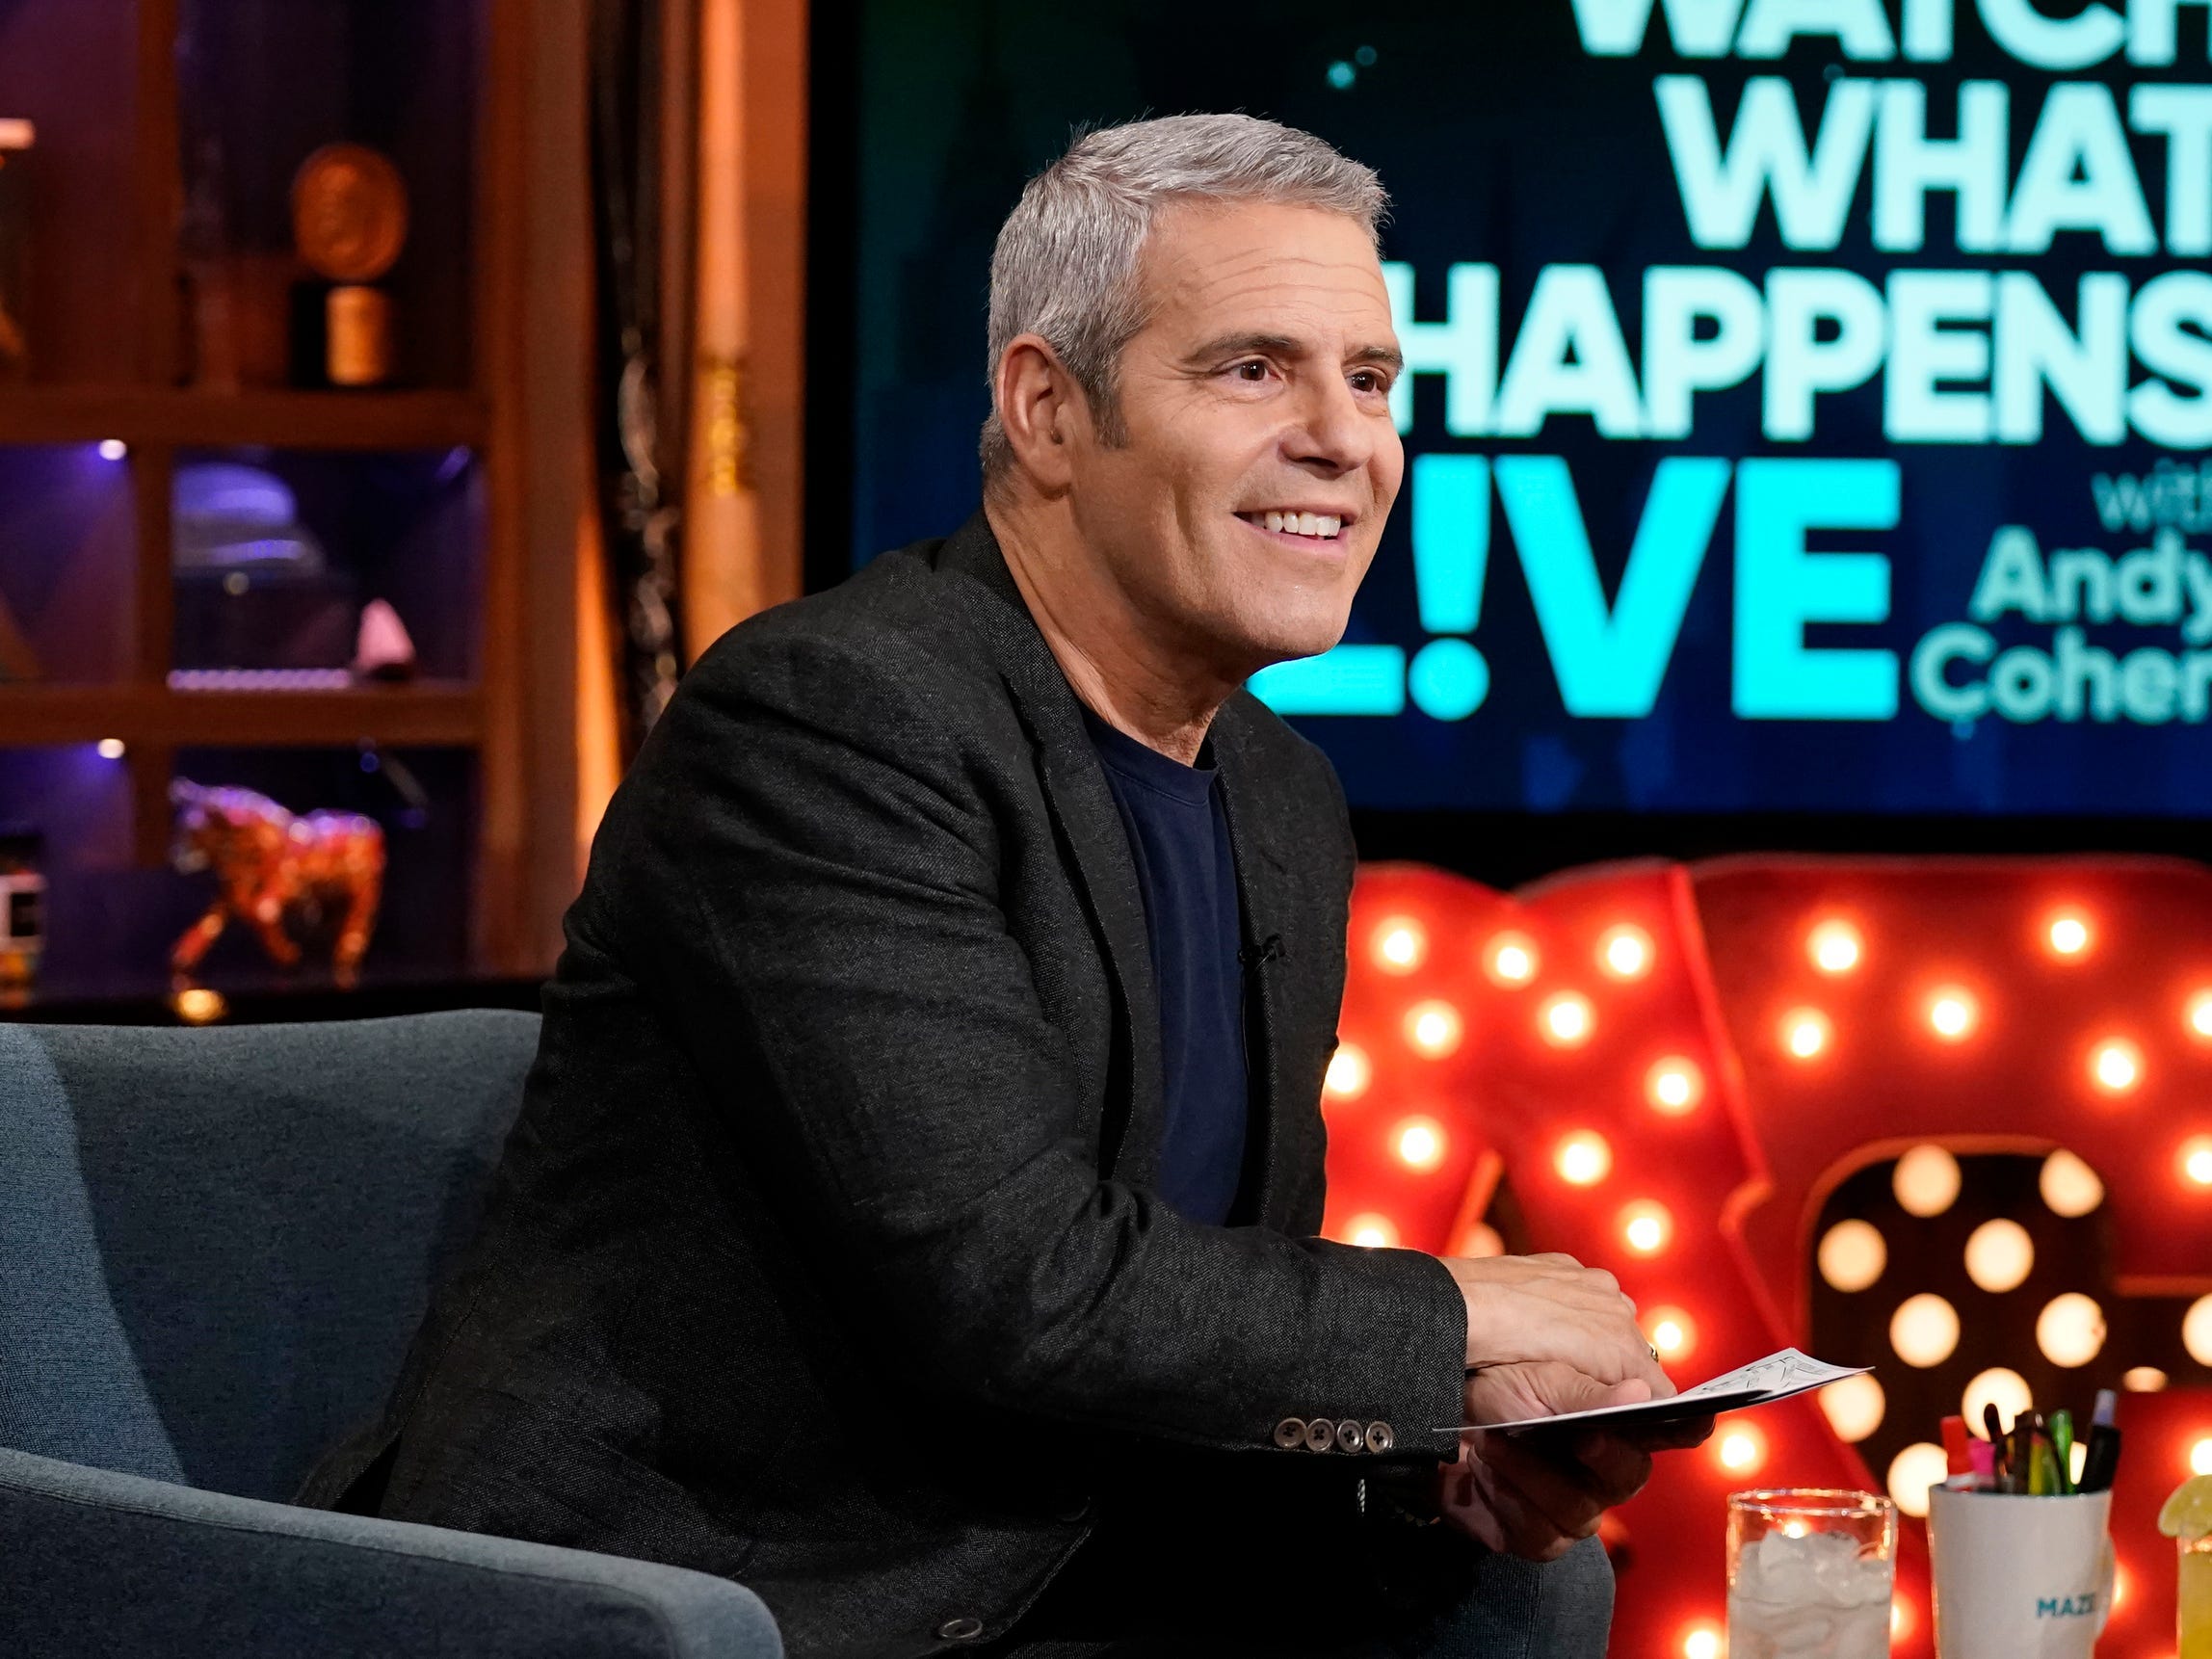 andy cohen says he missed a lot of red flags when fraudsters scammed him by pretending to be his bank